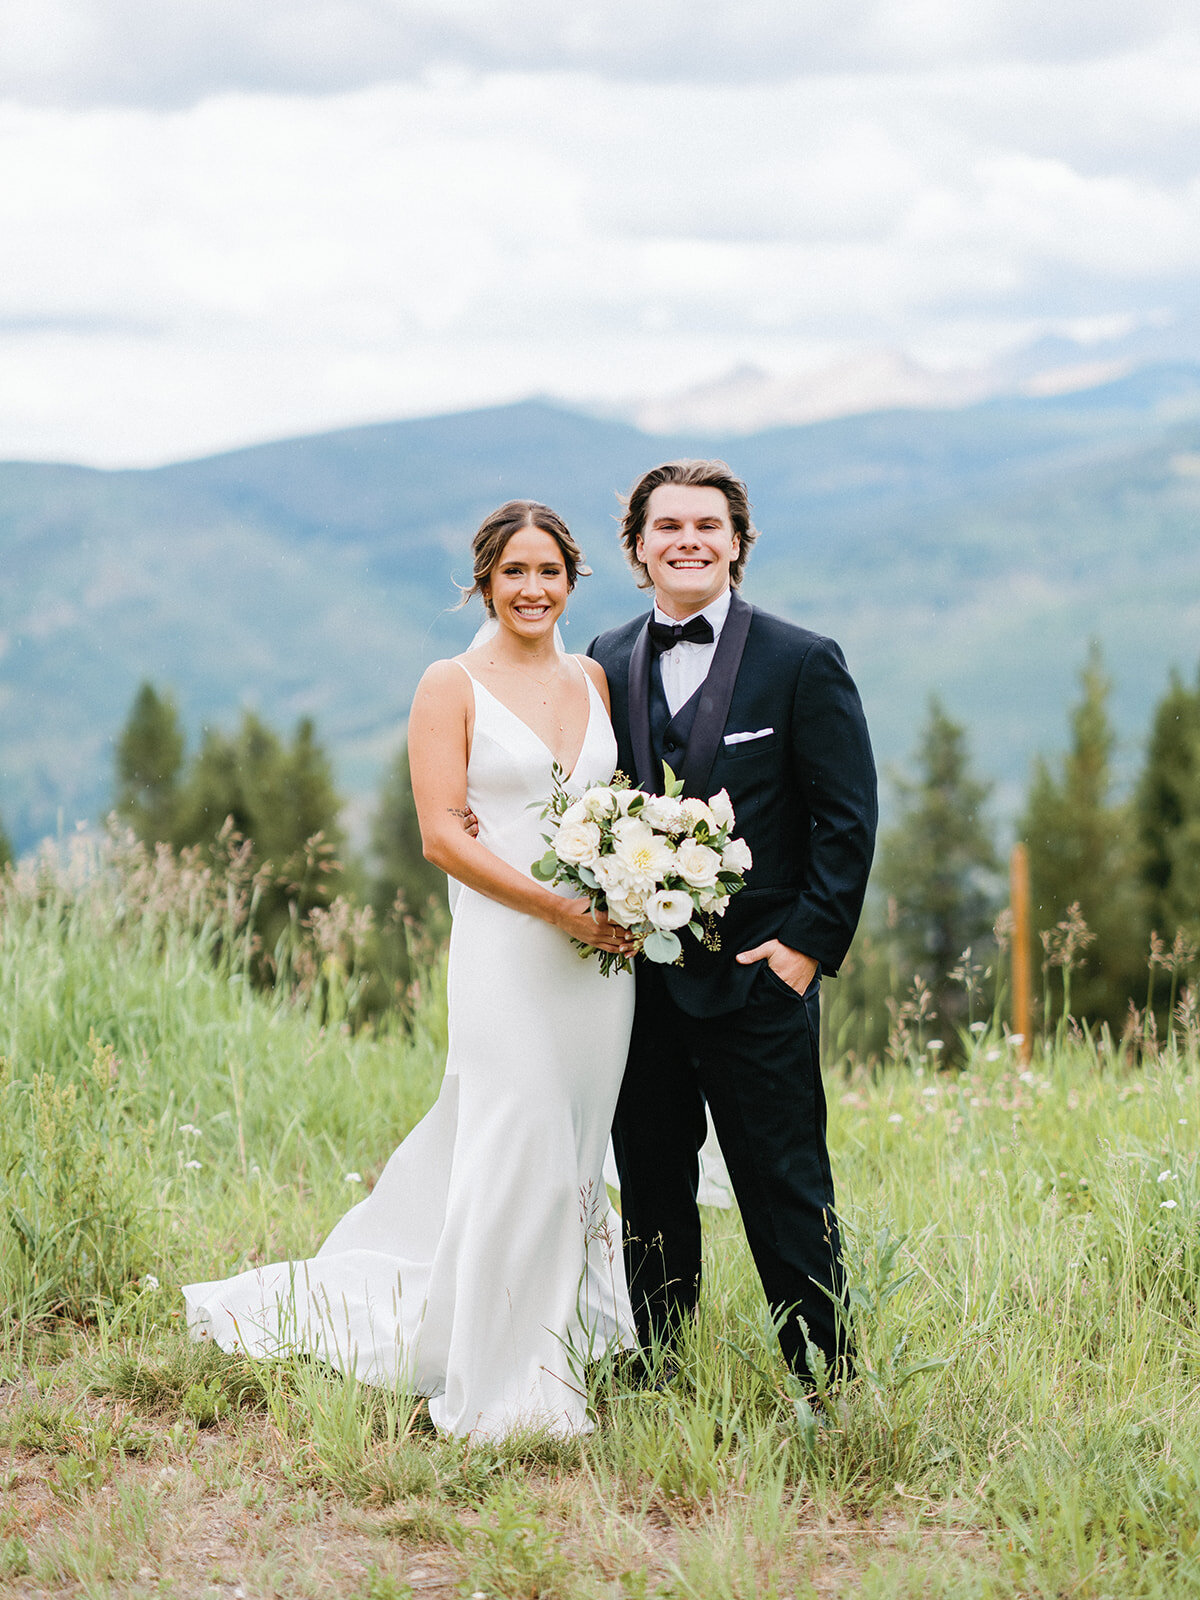 The 10th Vail- Aly & Tanner (21)